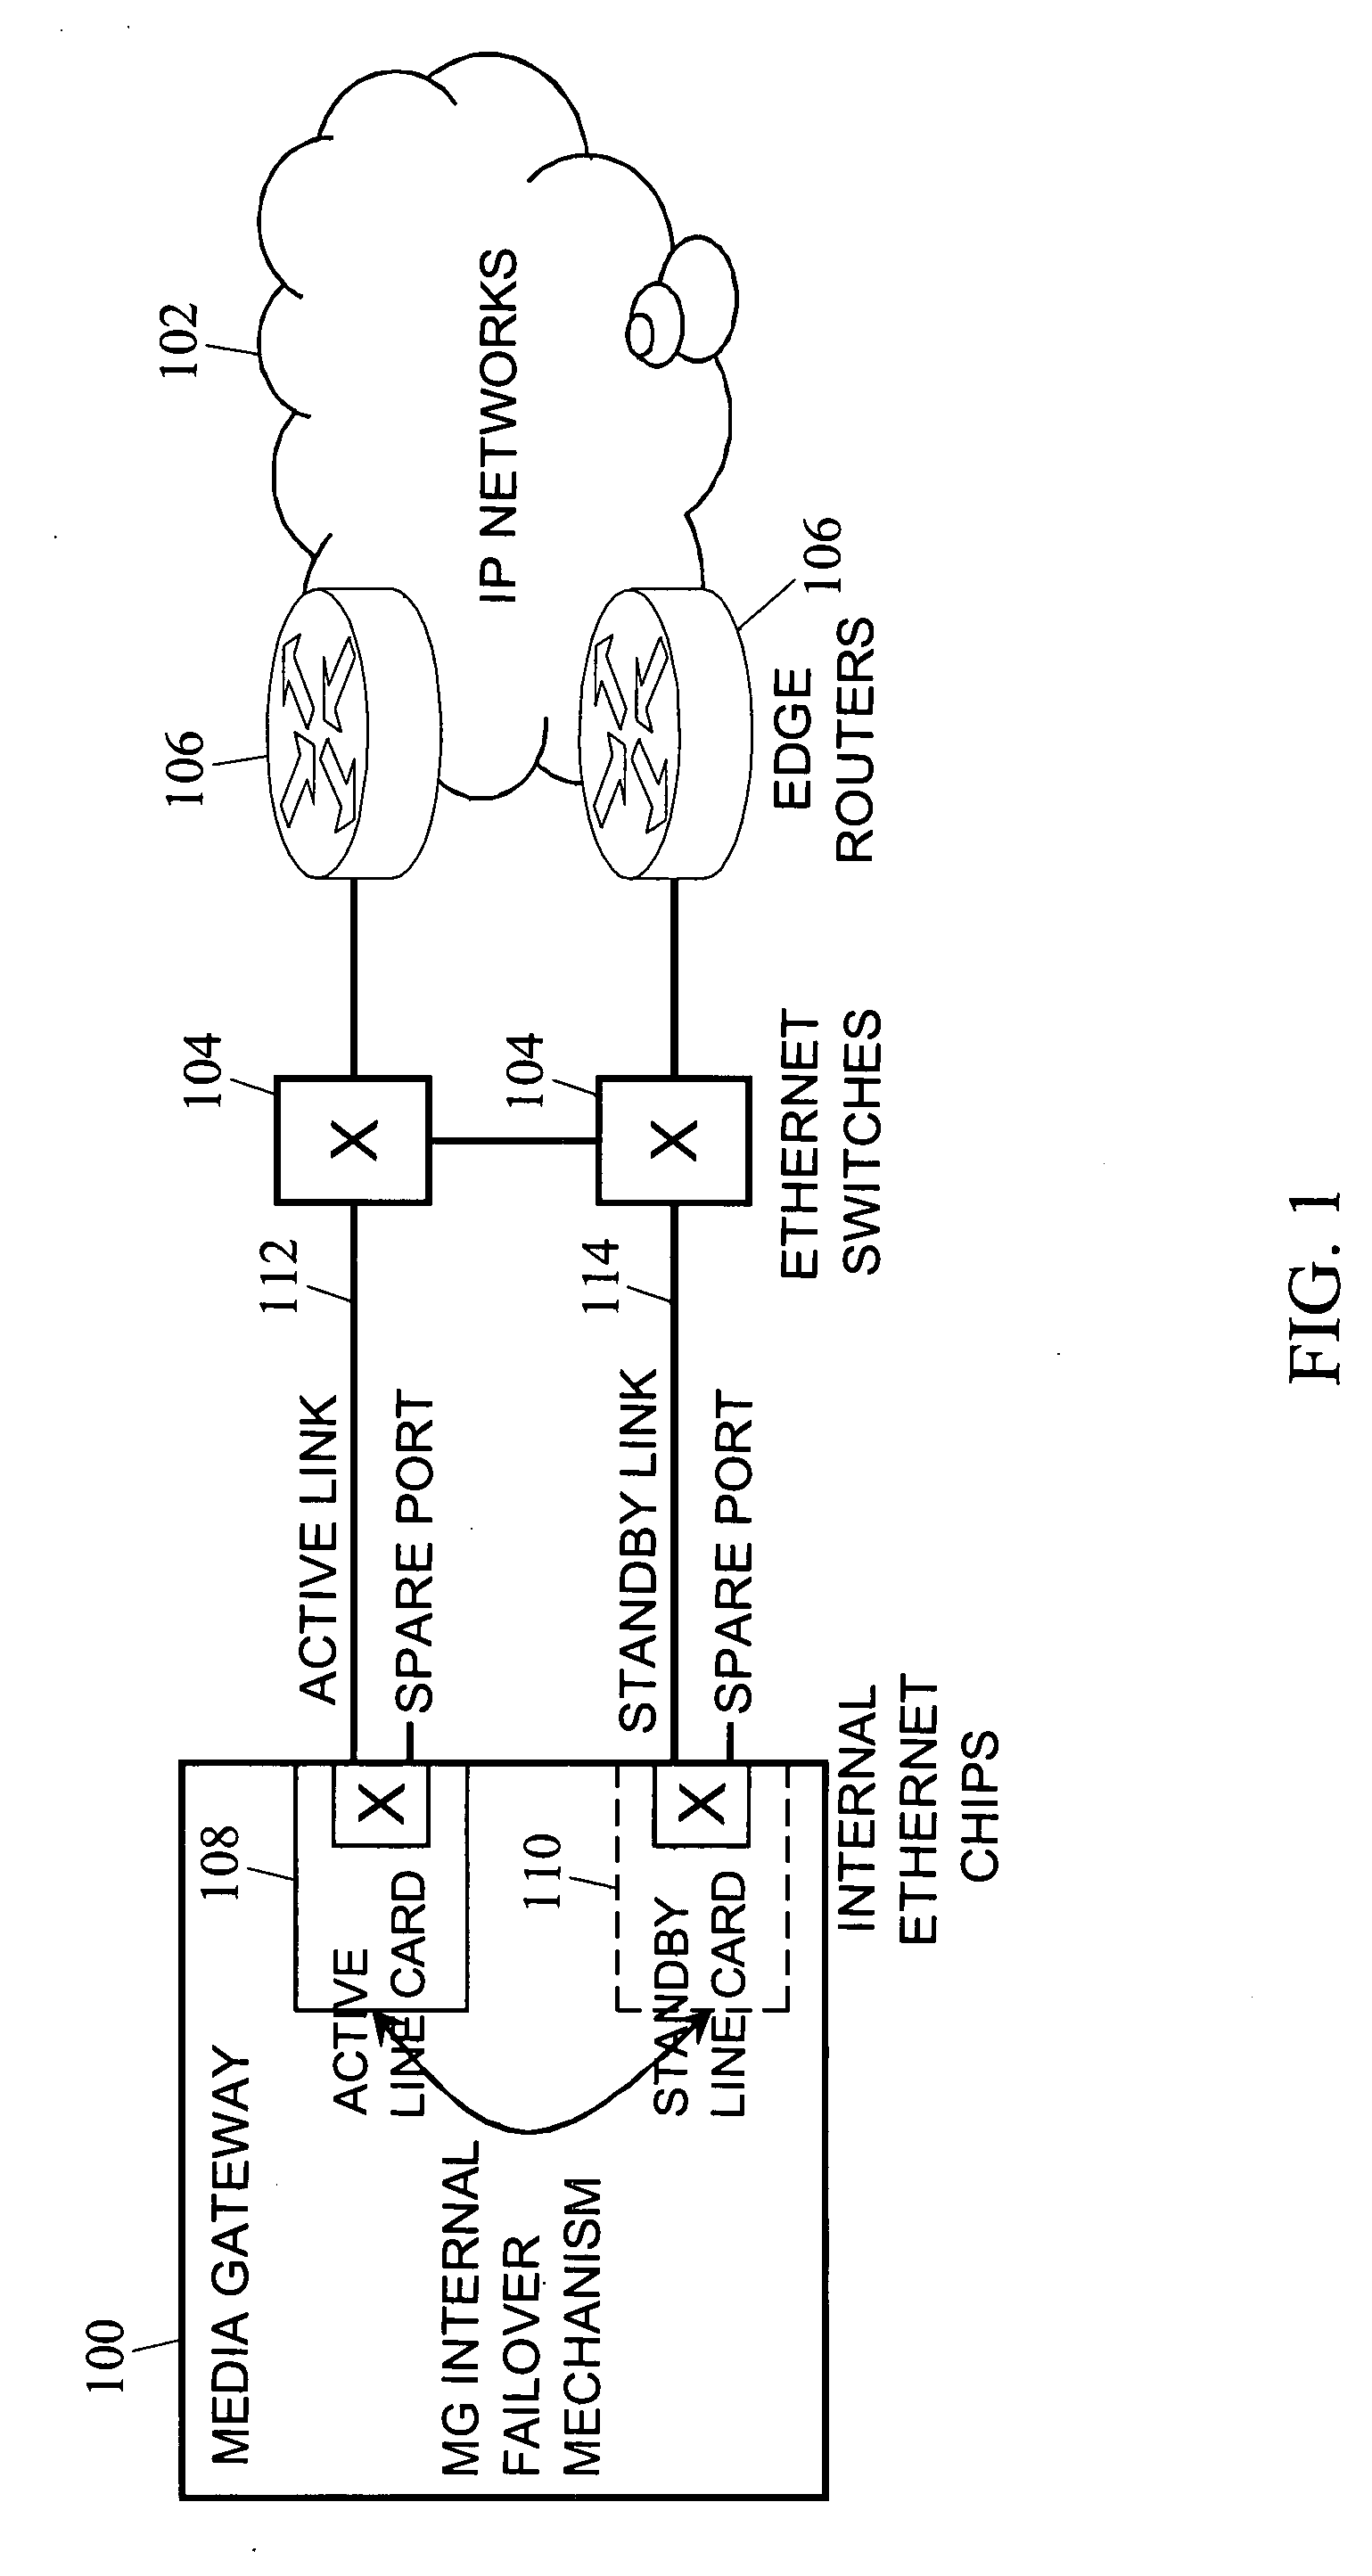 Methods, systems, and computer program products for implementing link redundancy in a media gateway